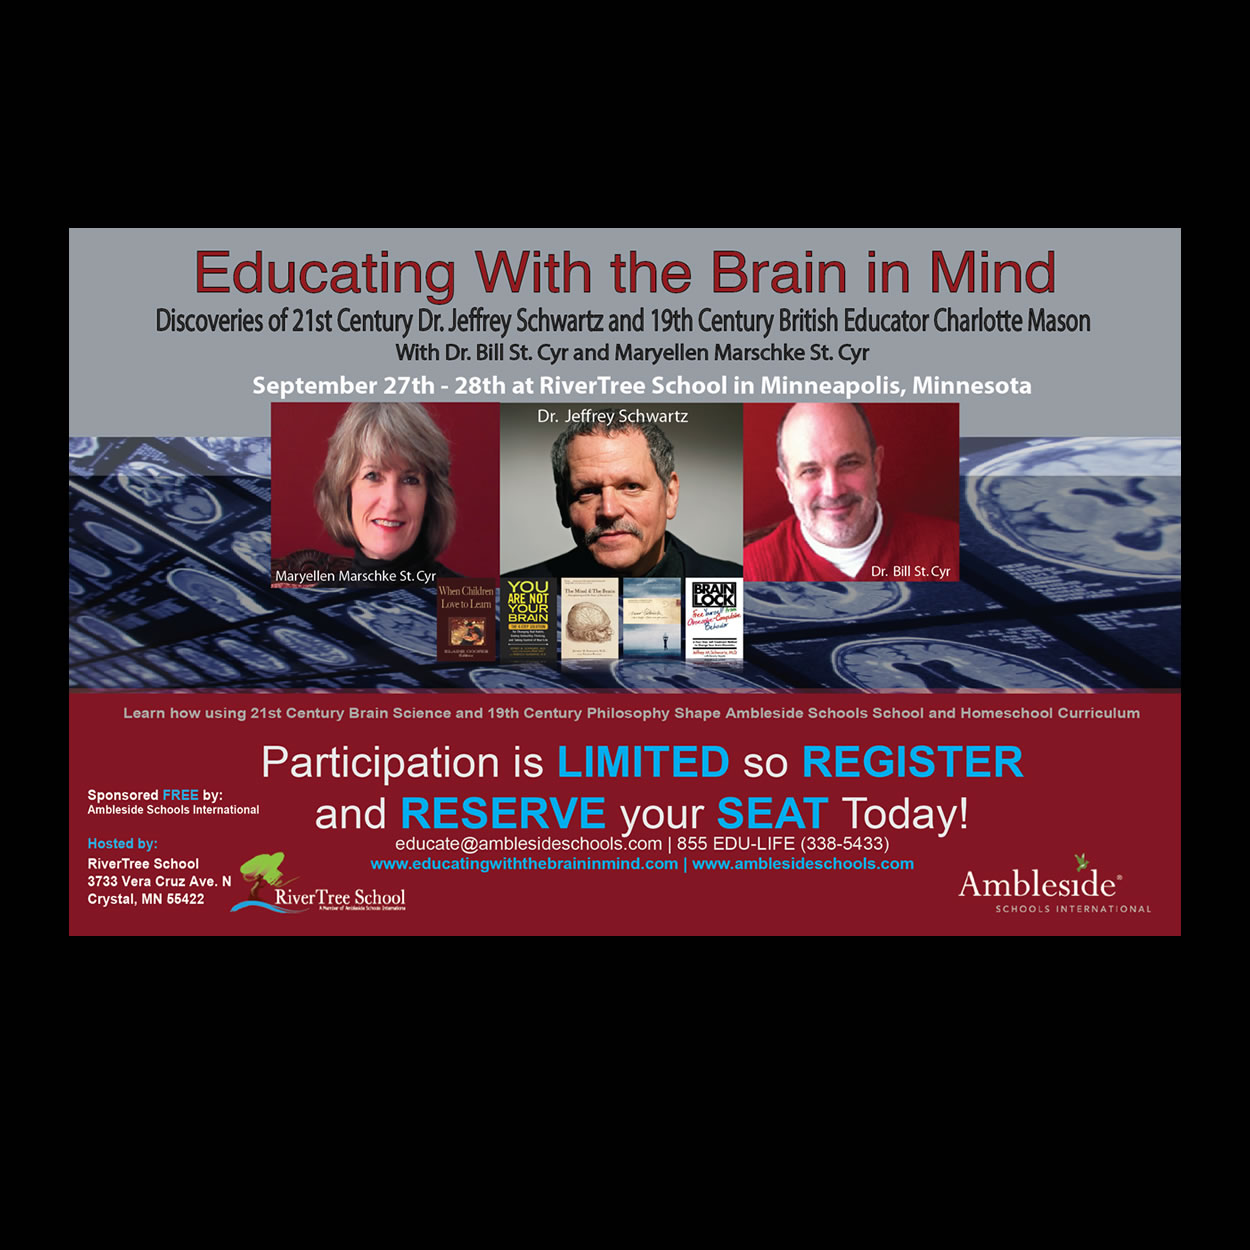 Educating with the Brain in Mind Seminar Dr. Bill St. Cyr